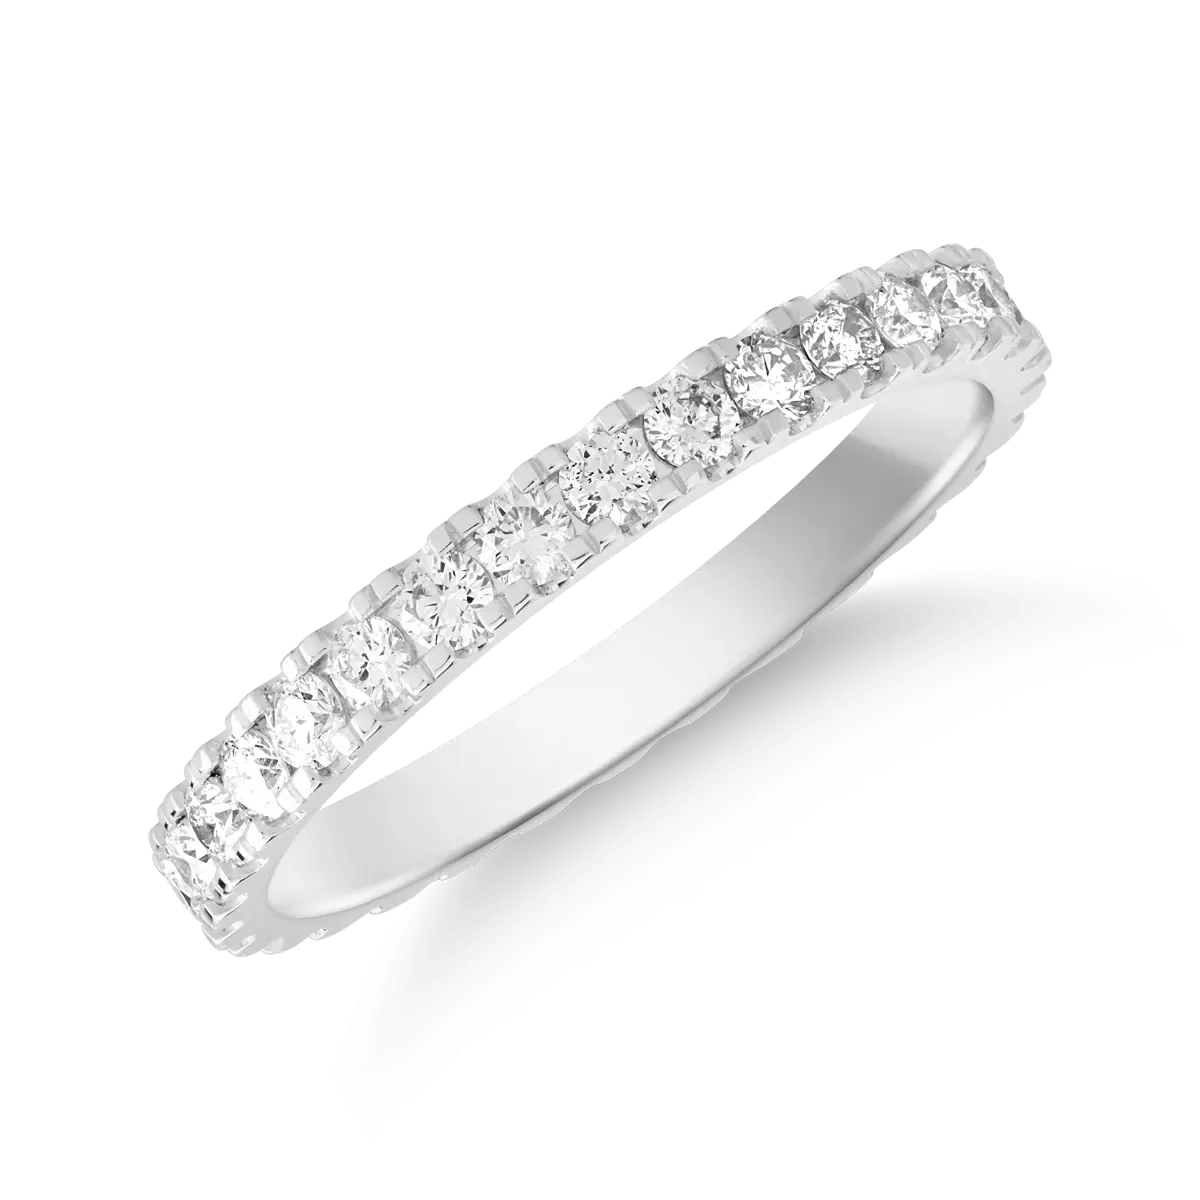 18K white gold ring with 0.73ct diamond